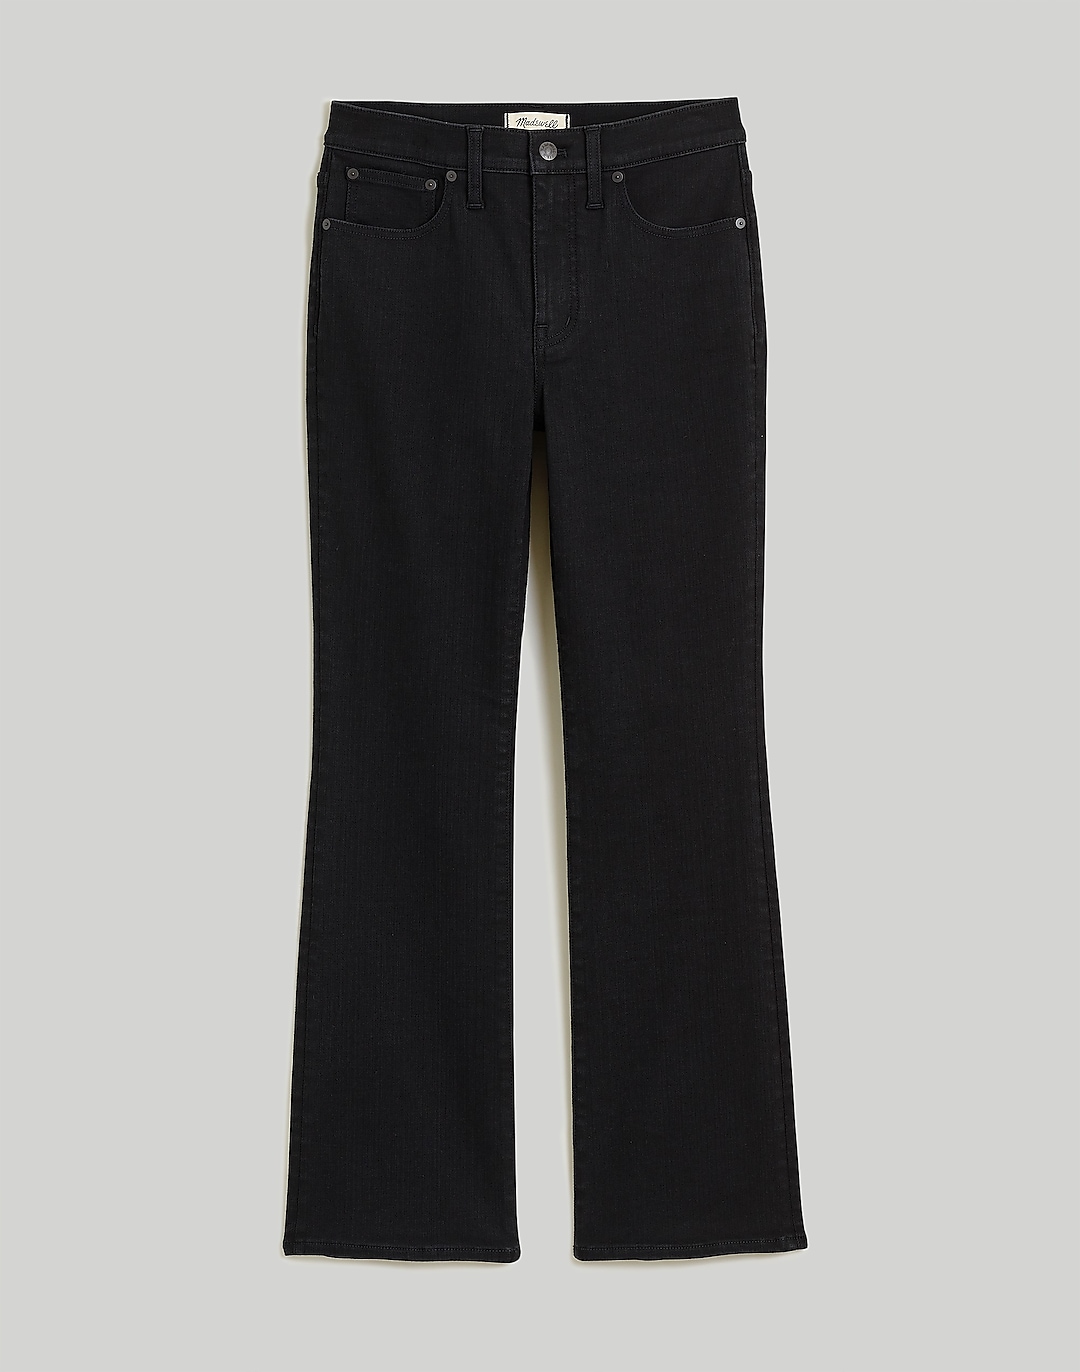 Petite Kick Out Crop Jeans in Black Rinse Wash | Madewell